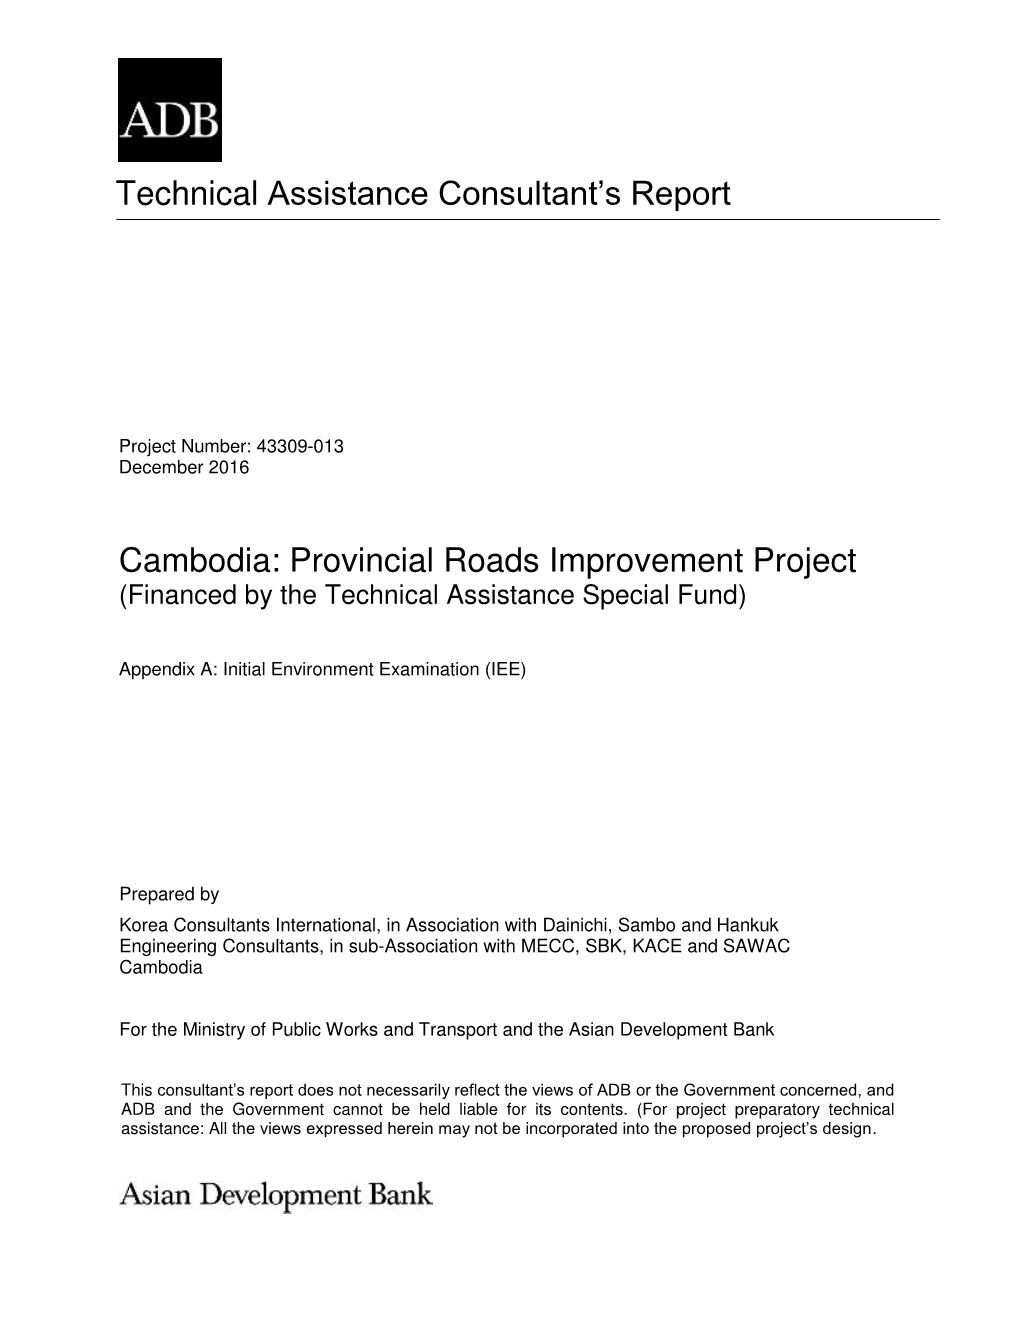 Cambodia: Provincial Roads Improvement Project (Financed by the Technical Assistance Special Fund)